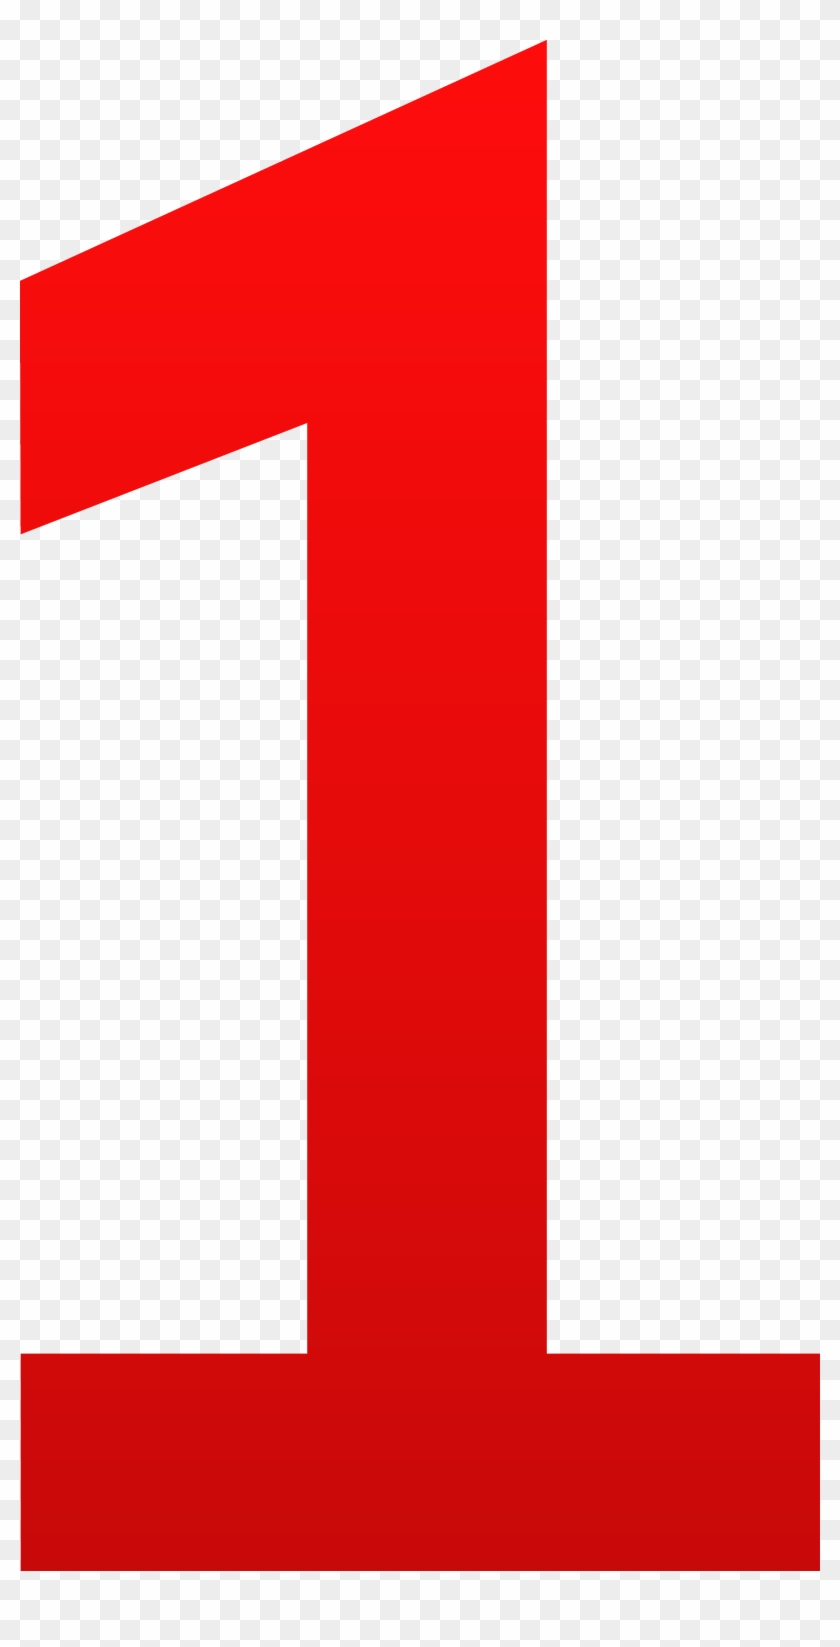 The Number One - Red Number 1 Clipart #593969